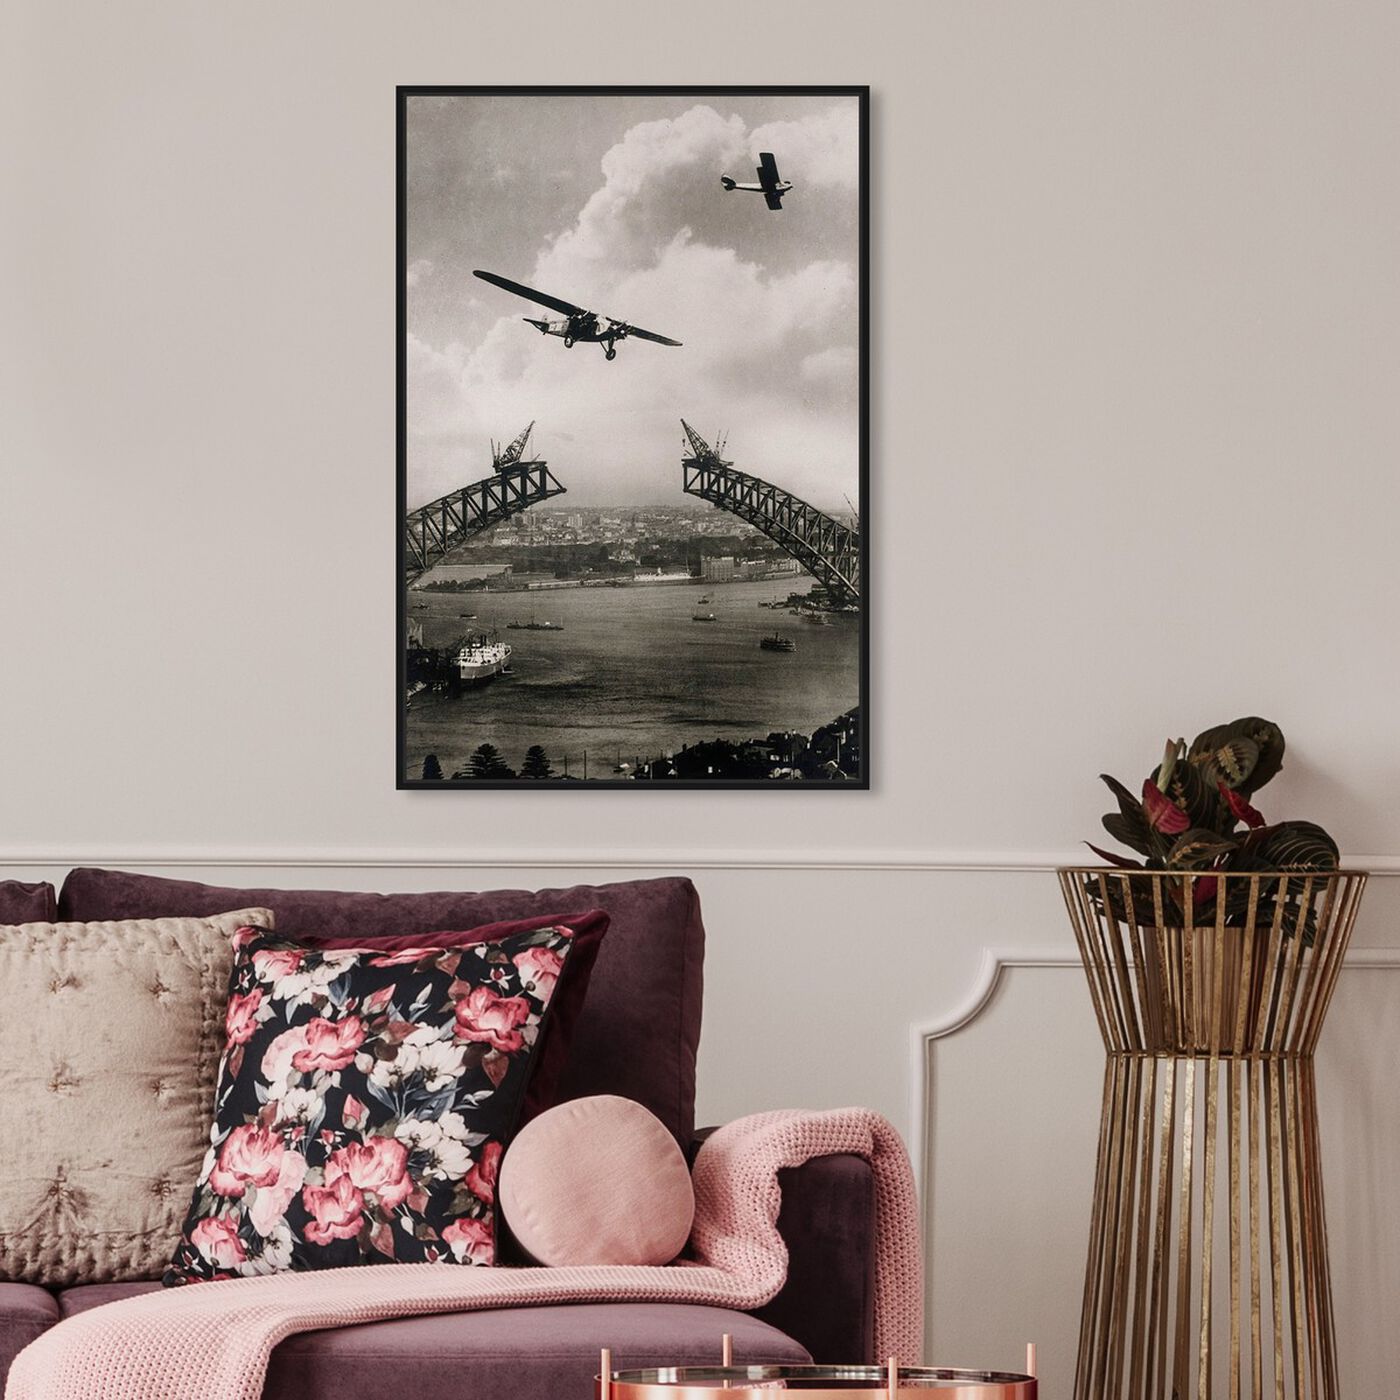 Hanging view of Sydney Harbour Bridge - The Art Cabinet featuring transportation and airplanes art.